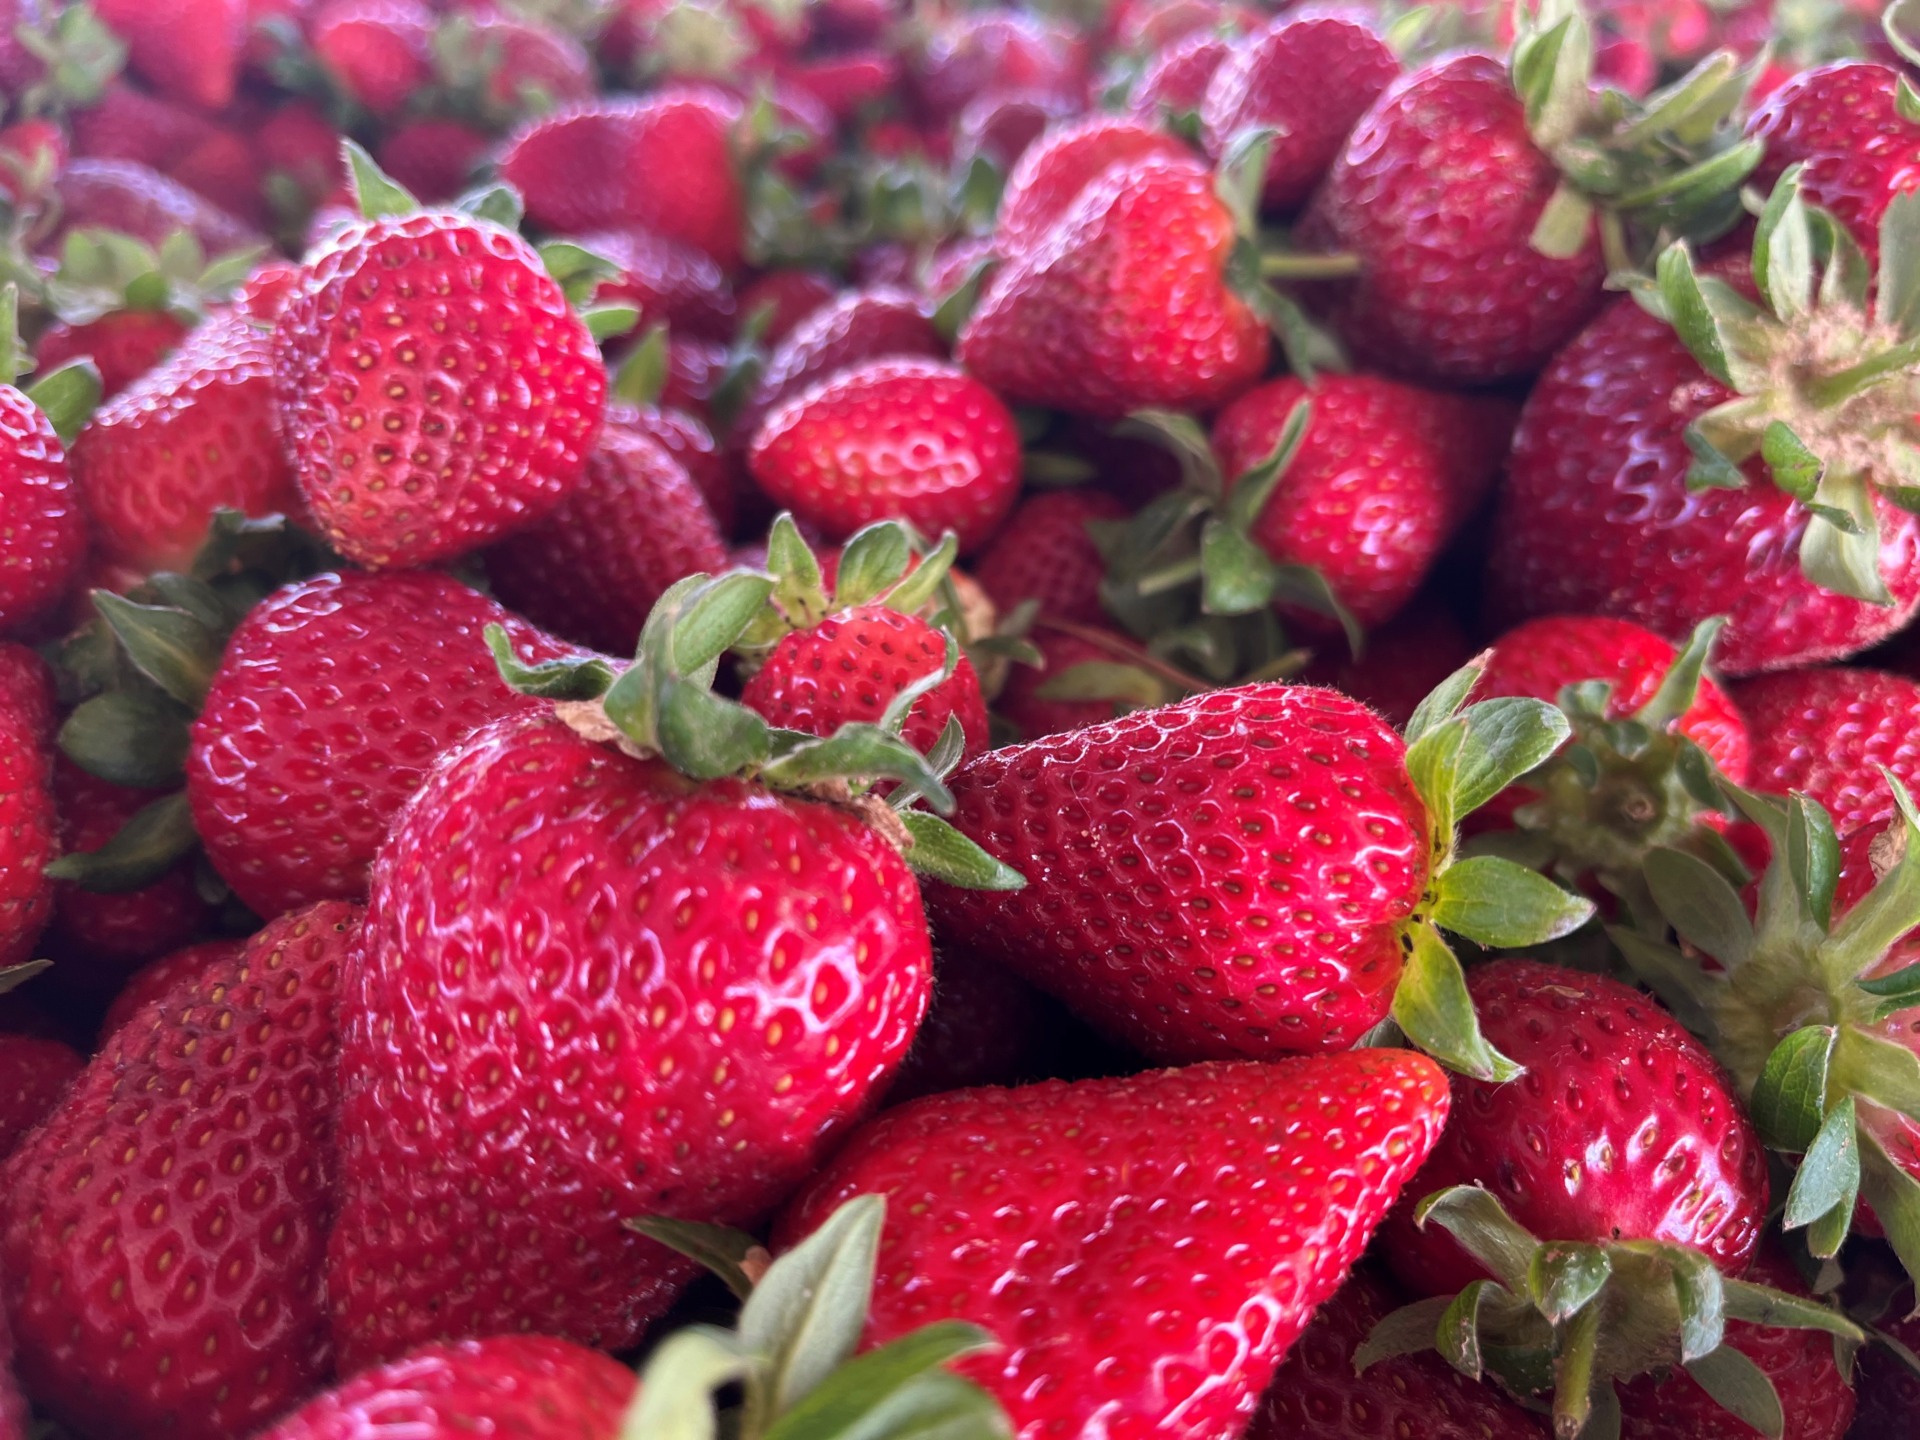 Strawberry season in Texas off to an excellent start